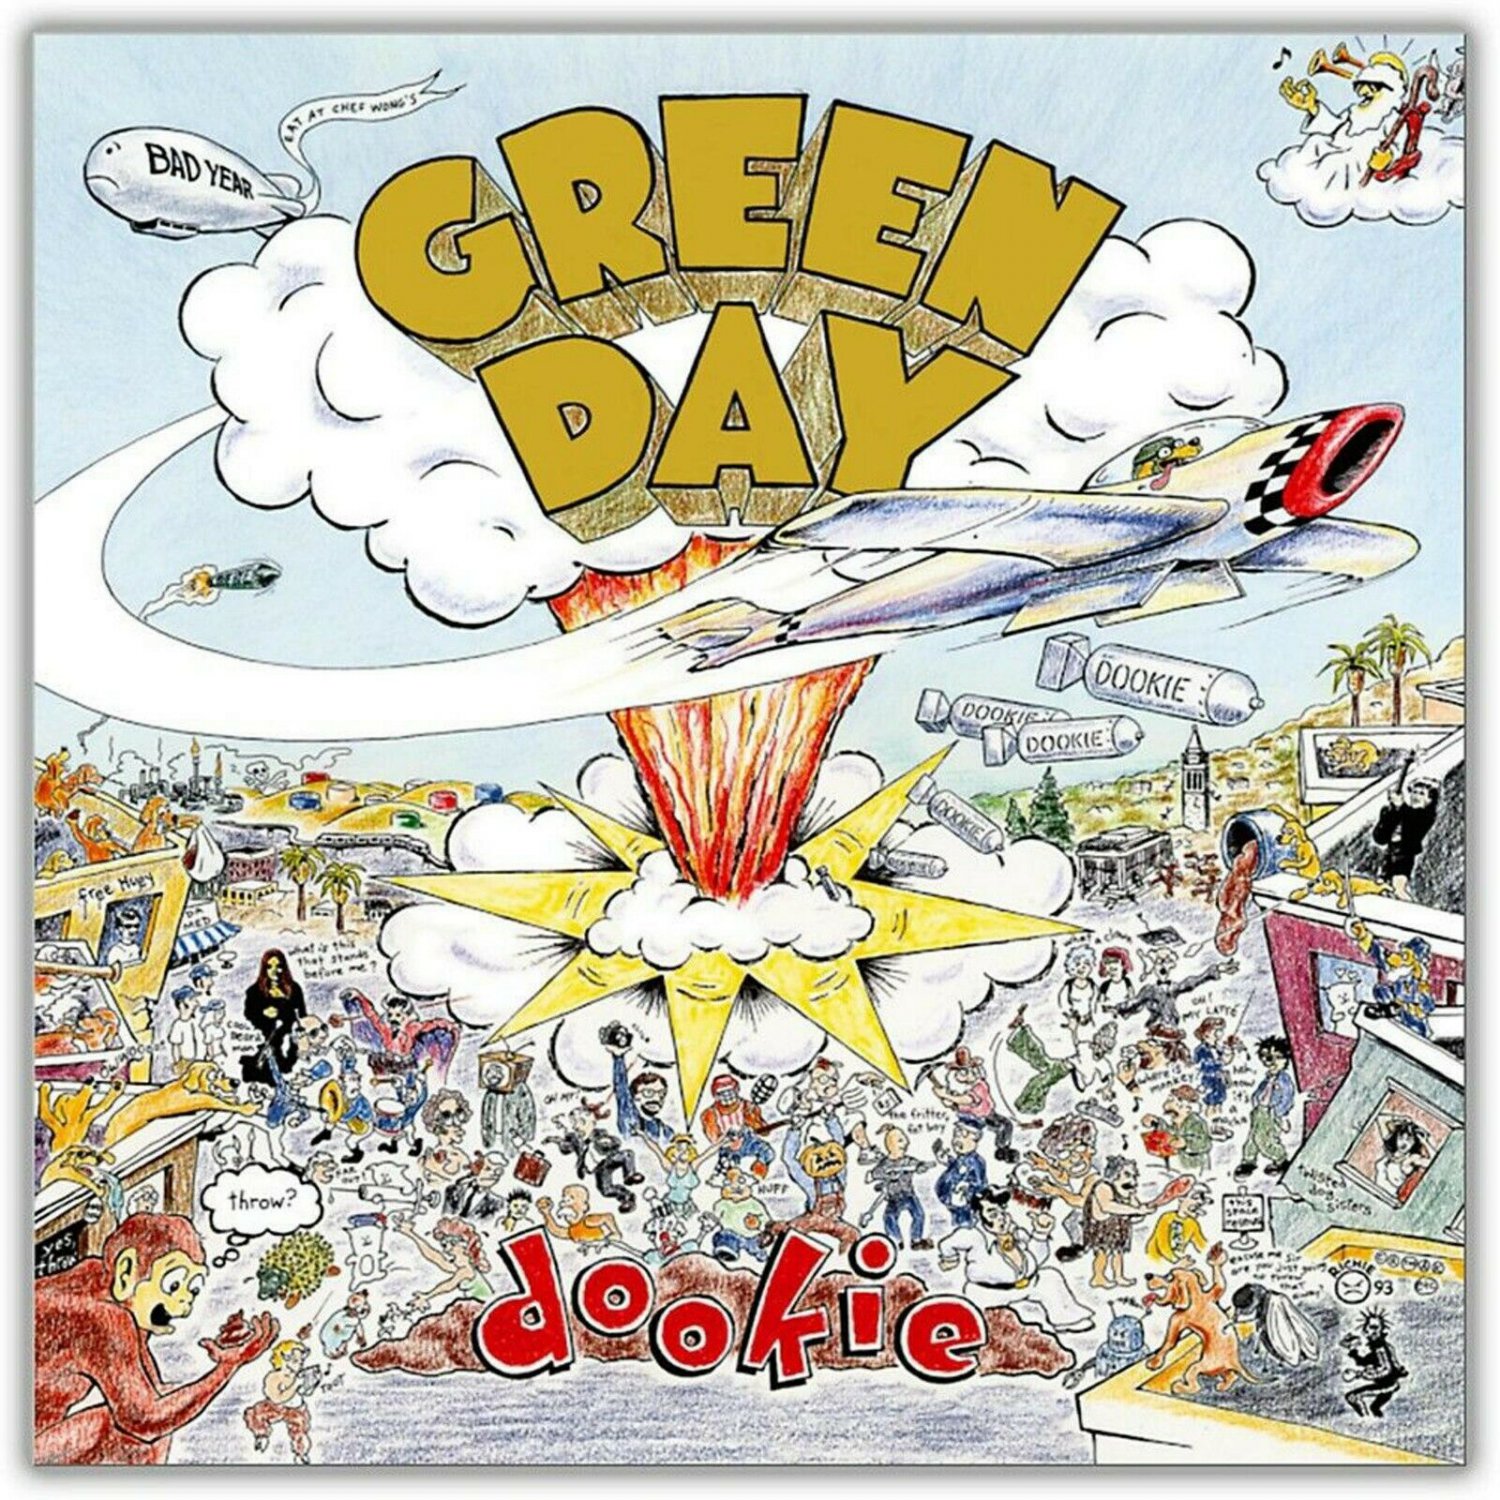 GREEN DAY Dookie BANNER Huge 4X4 Ft Fabric Poster Tapestry Flag Print album cover art